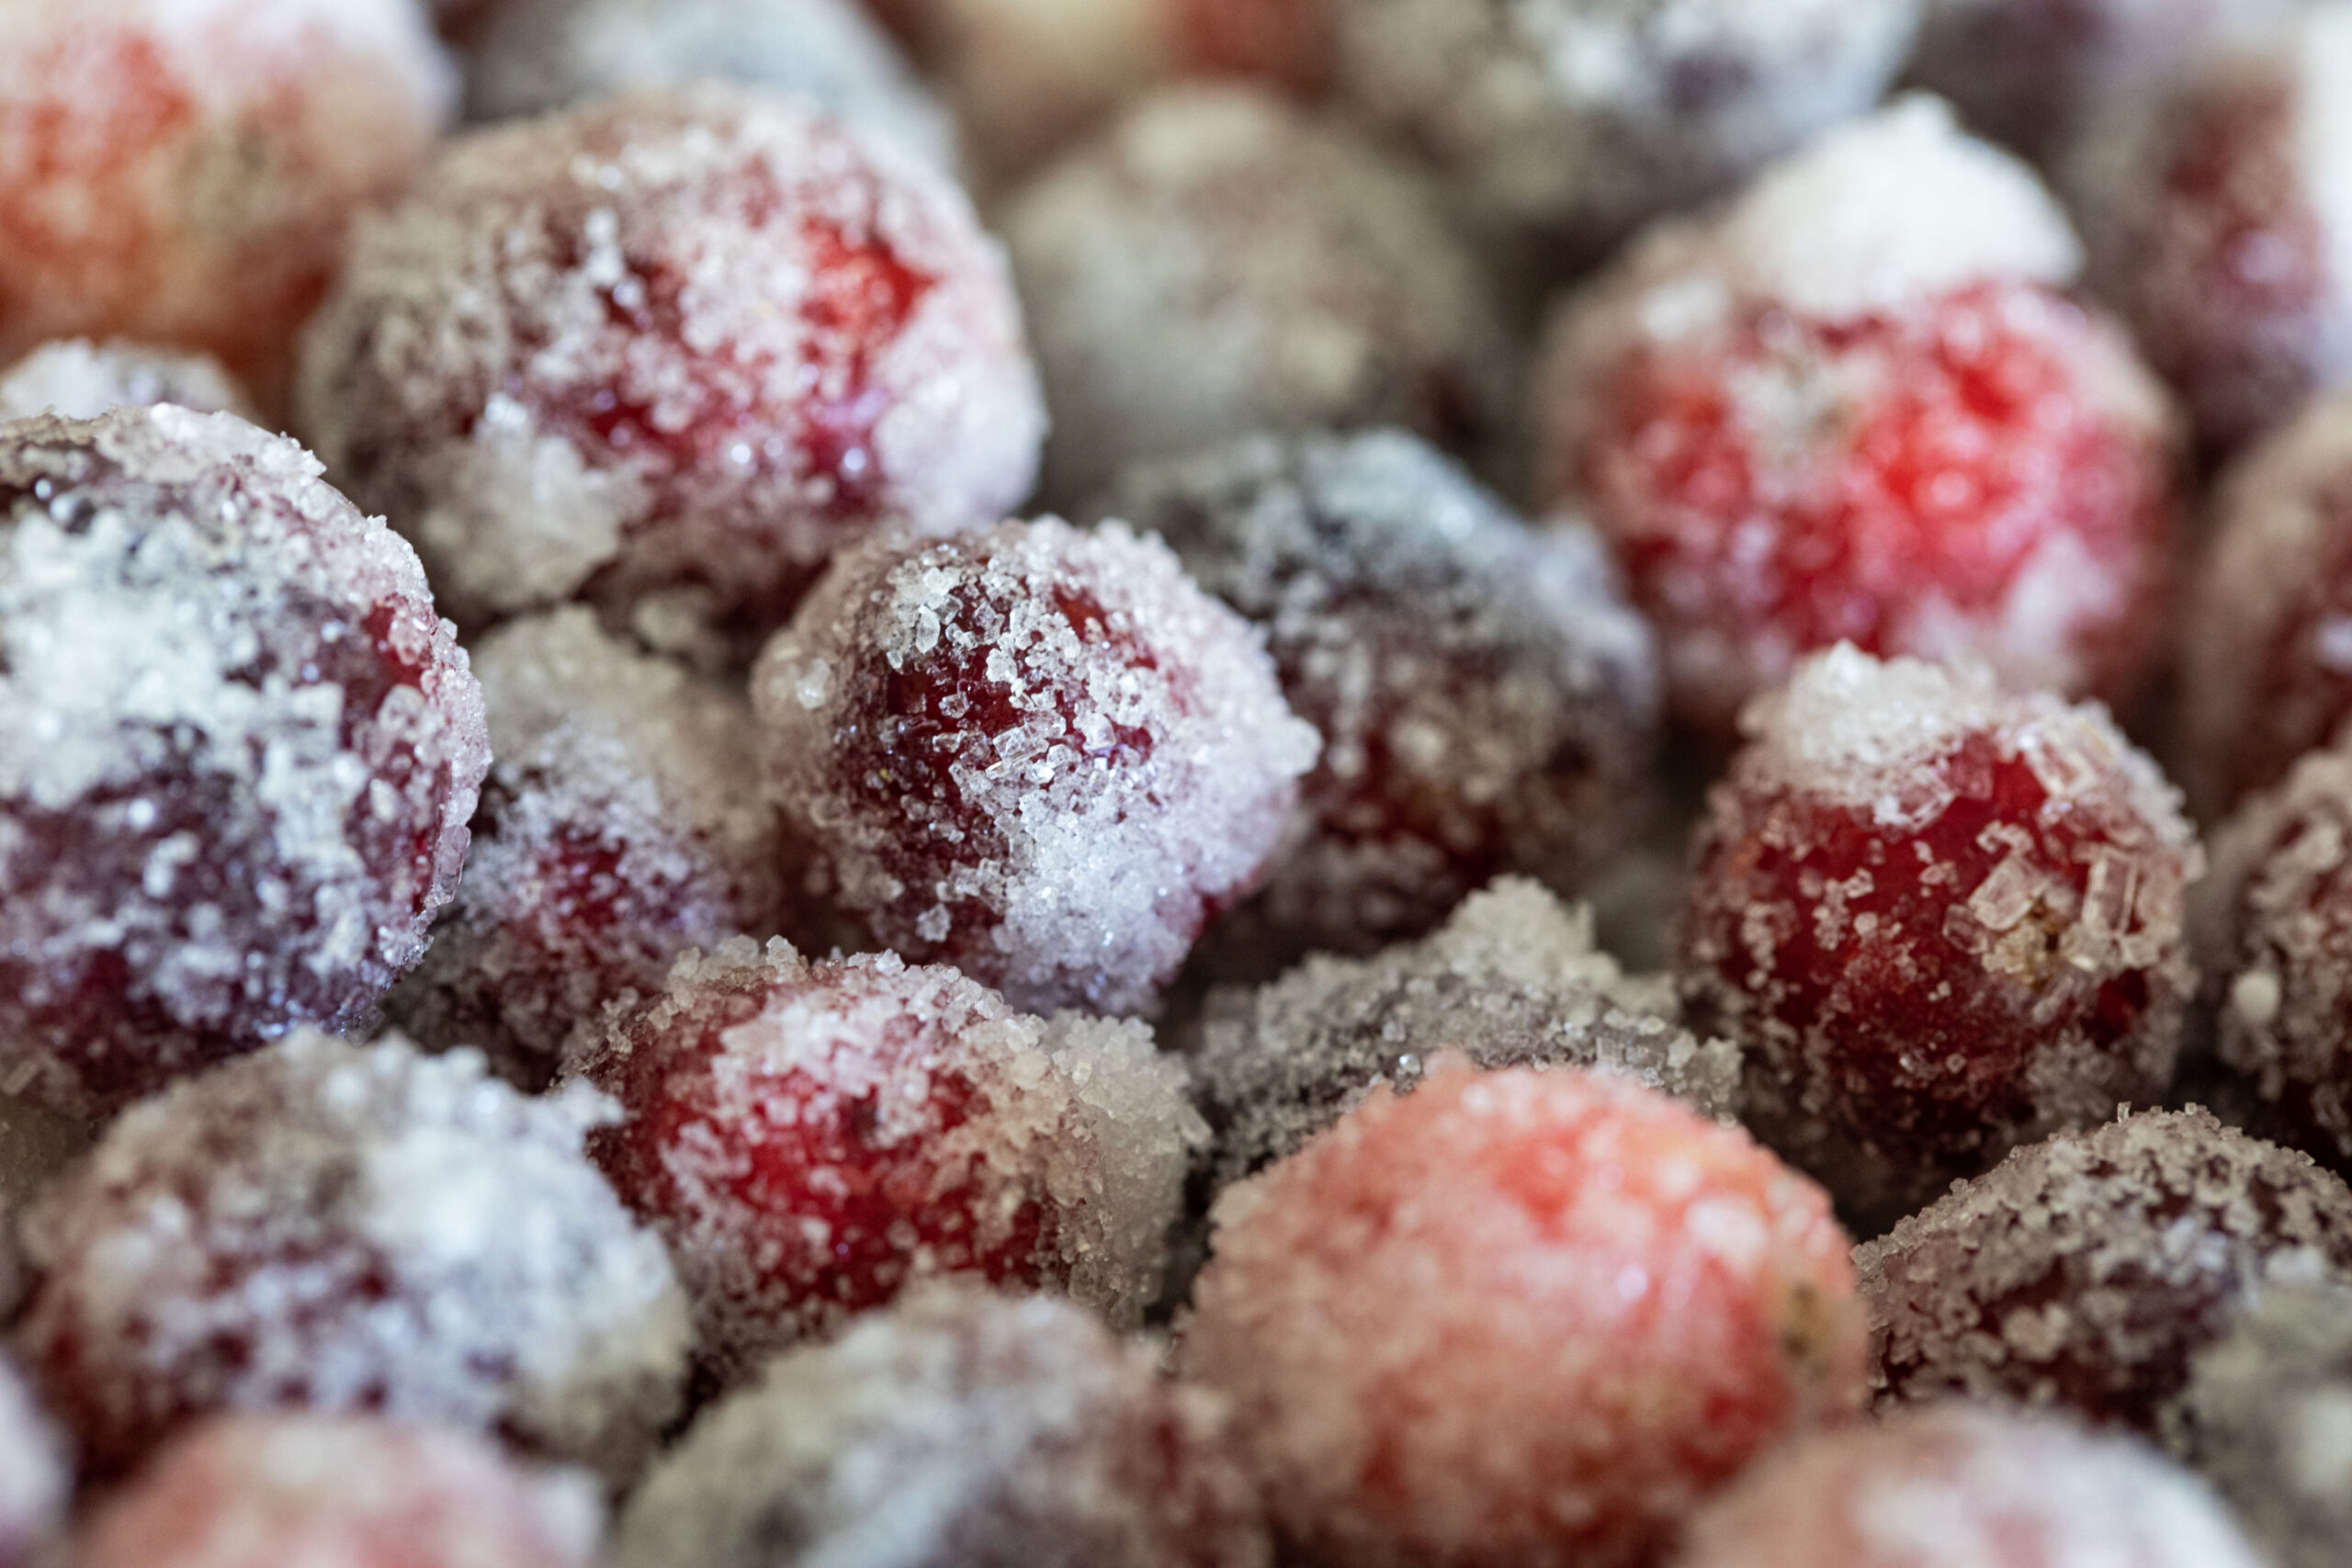 A close up of frozen raspberries in the snow